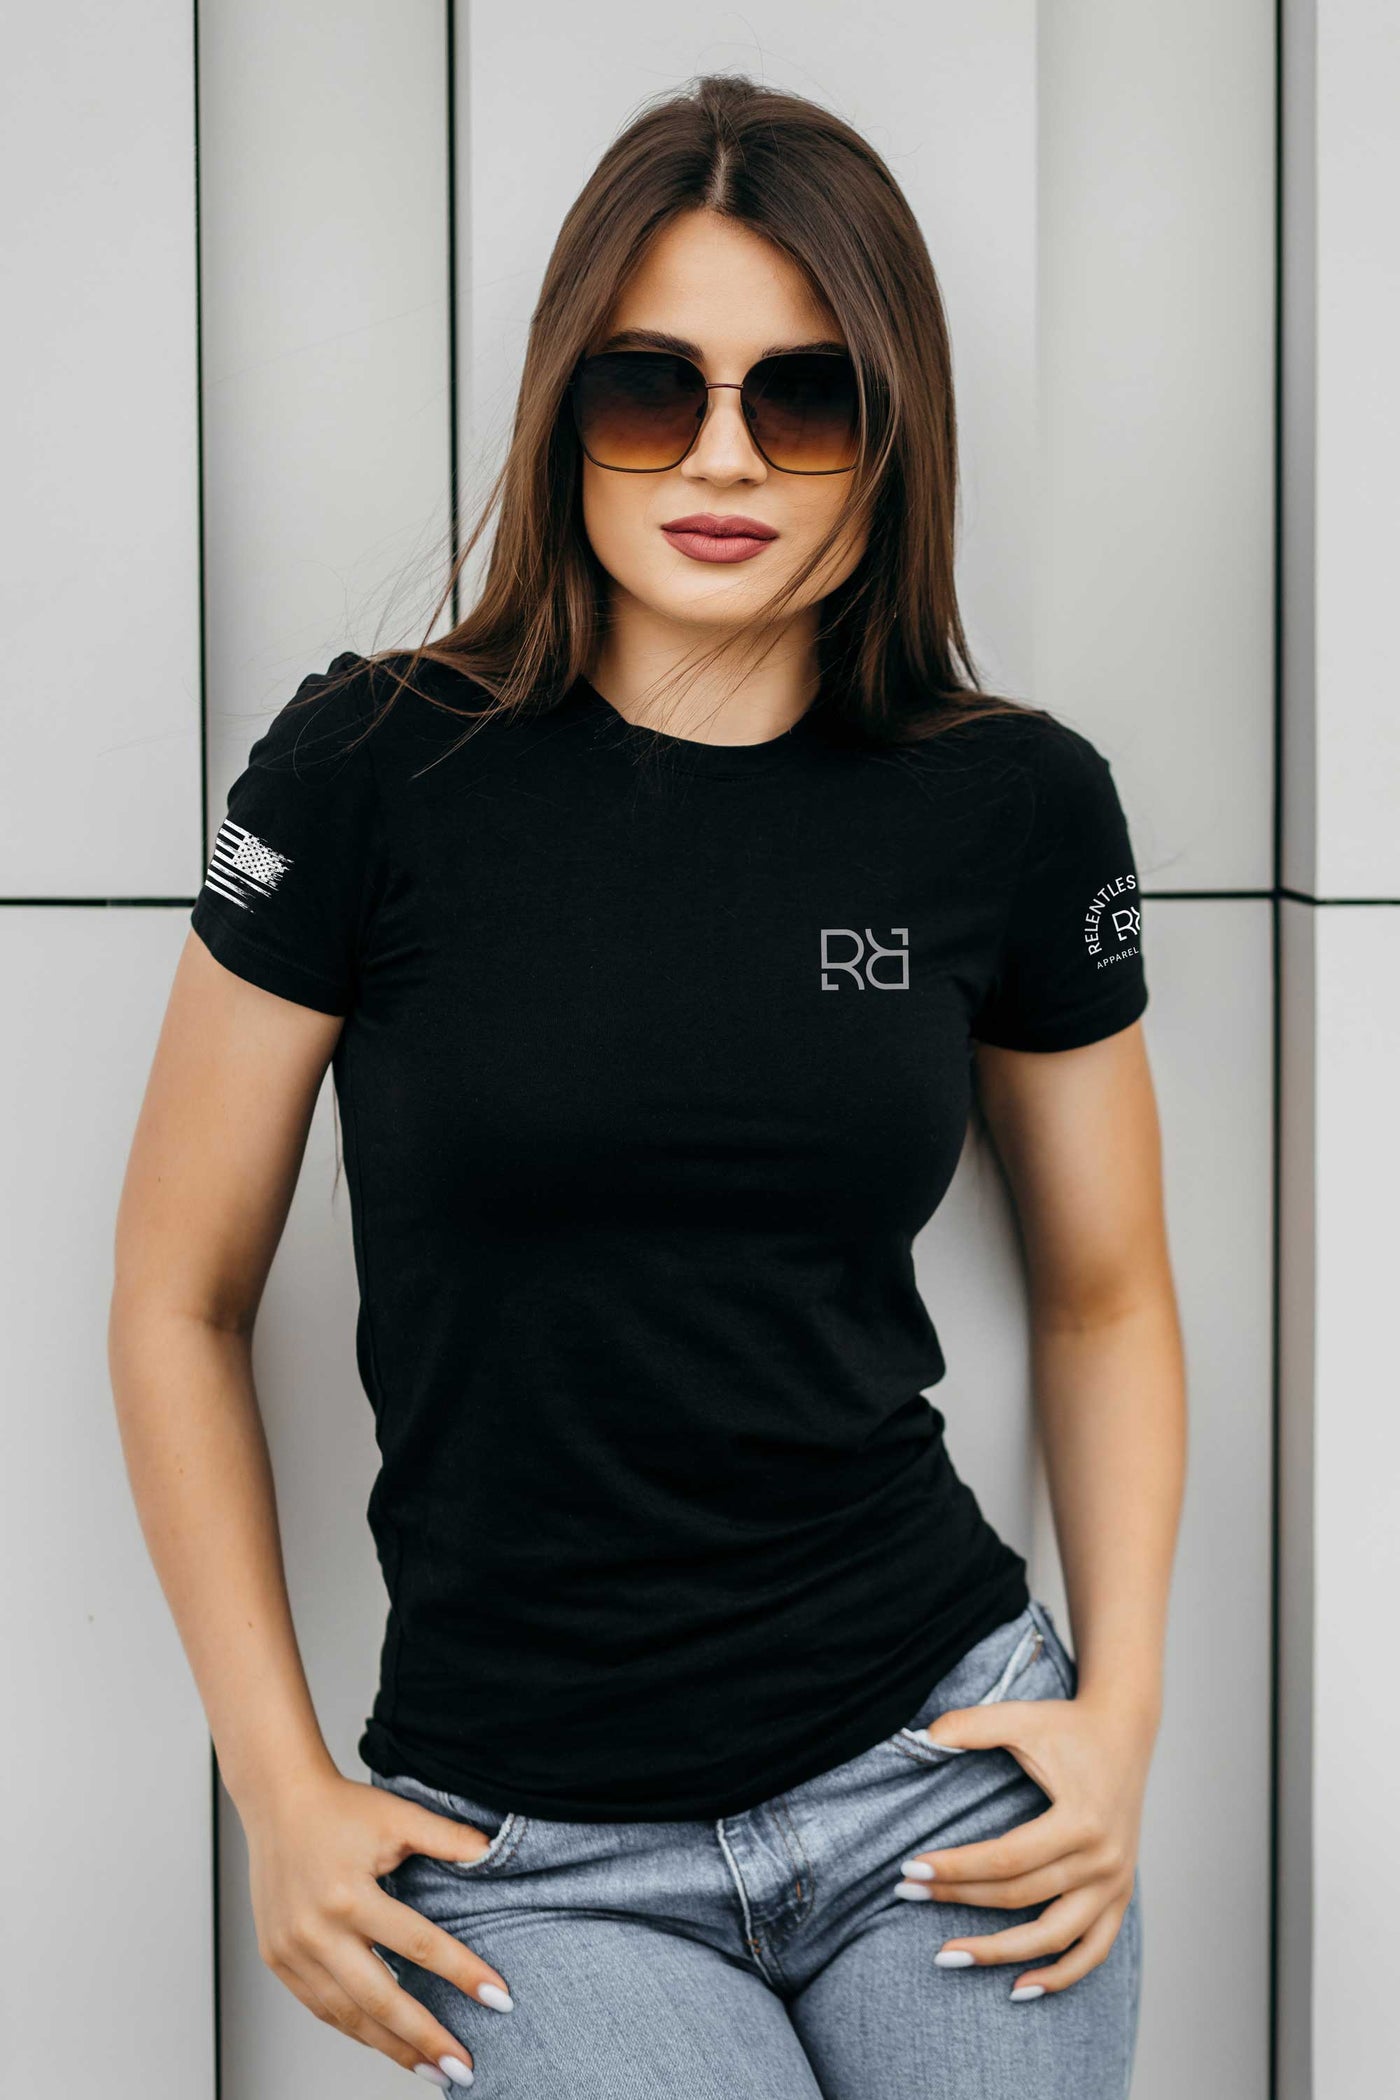 Today I Get To Work Out | Premium Women's Tee